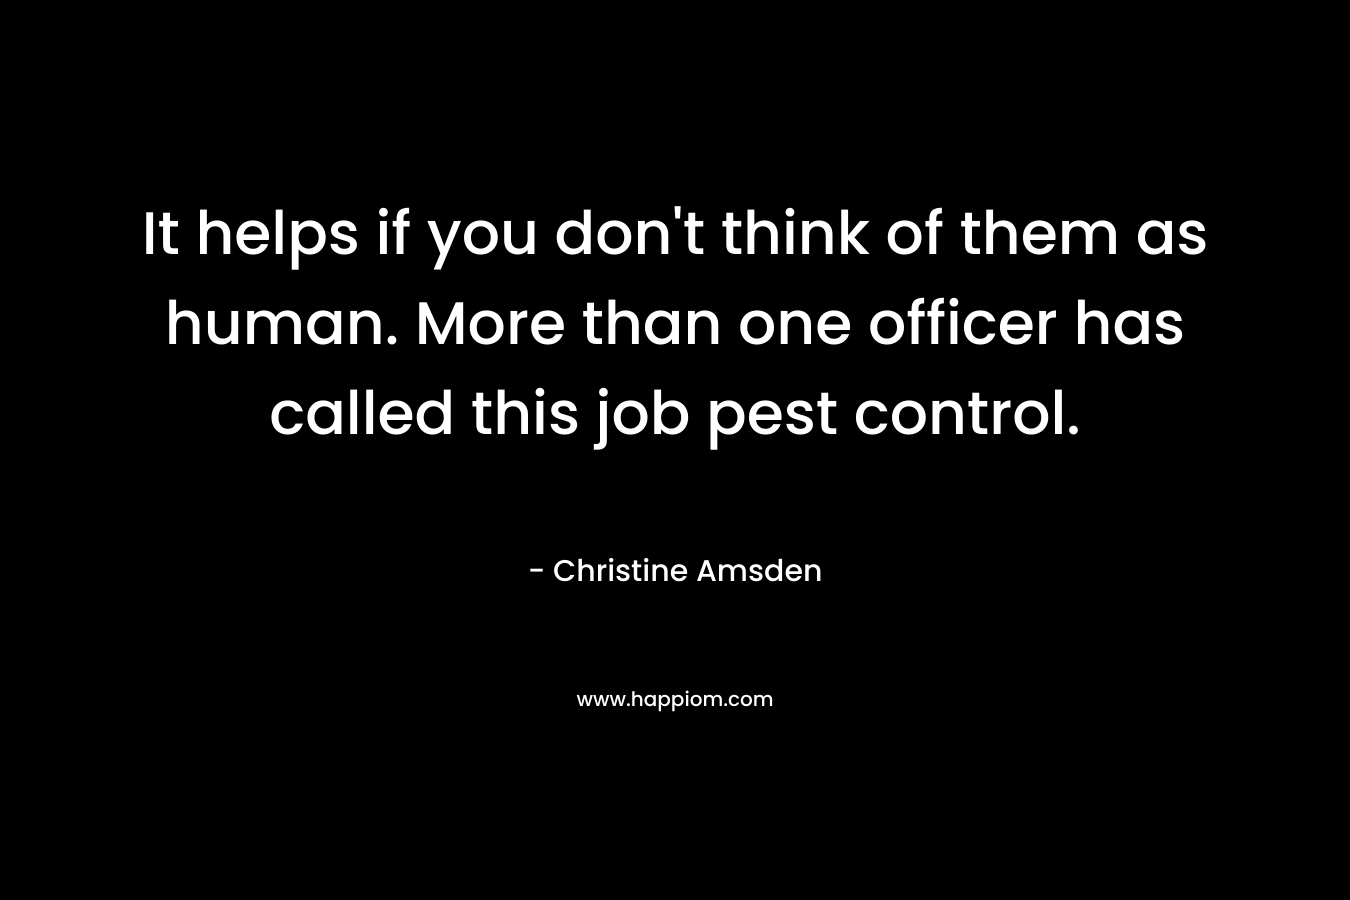 It helps if you don’t think of them as human. More than one officer has called this job pest control. – Christine Amsden